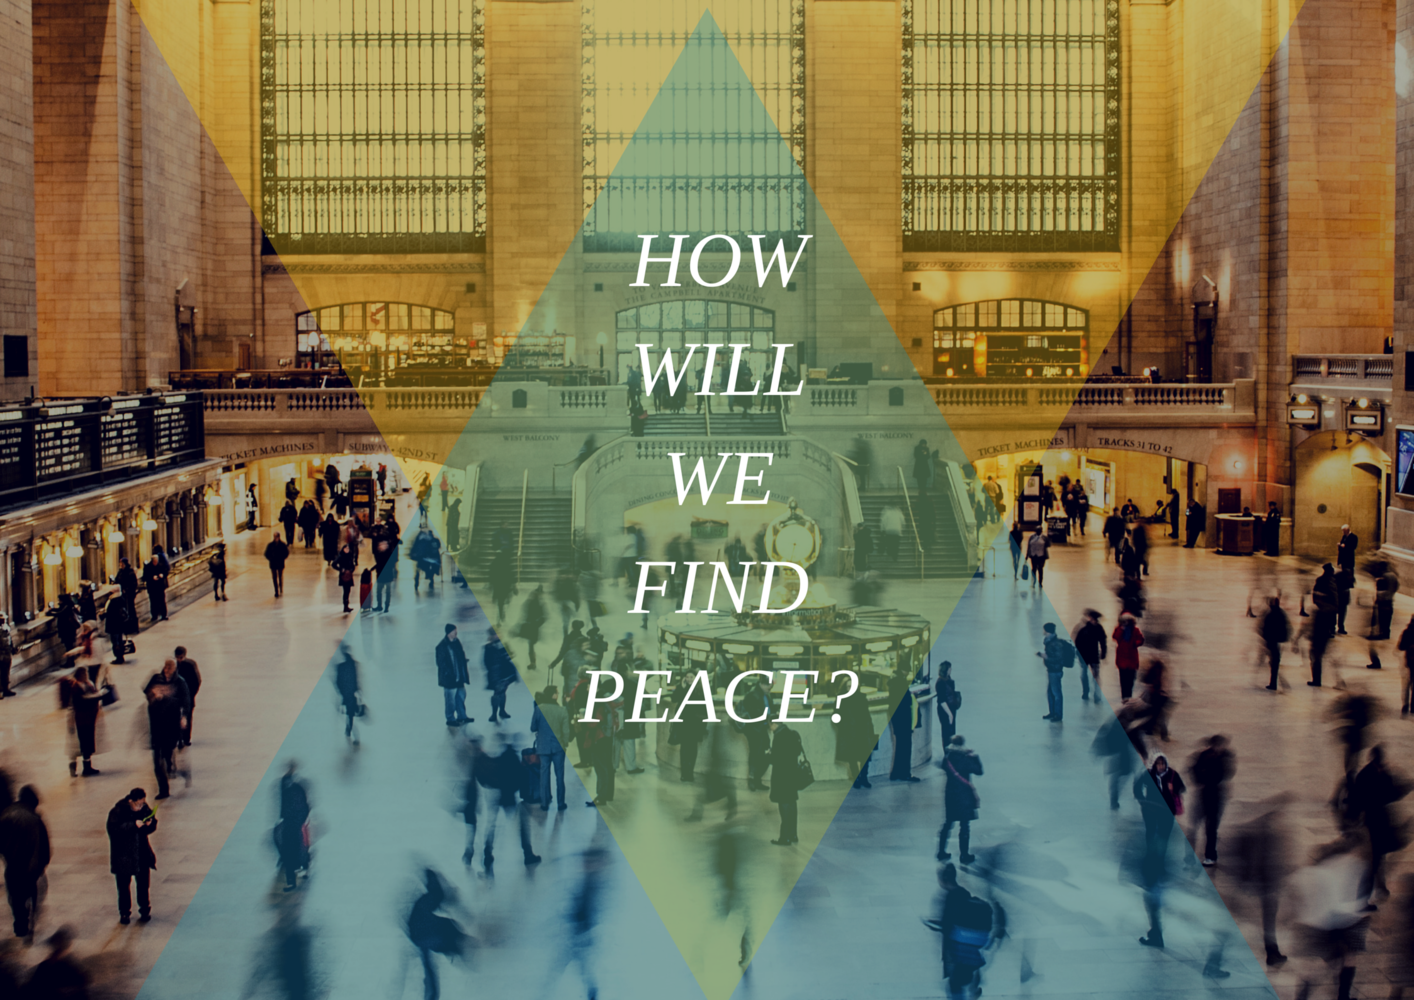 How will we find peace?